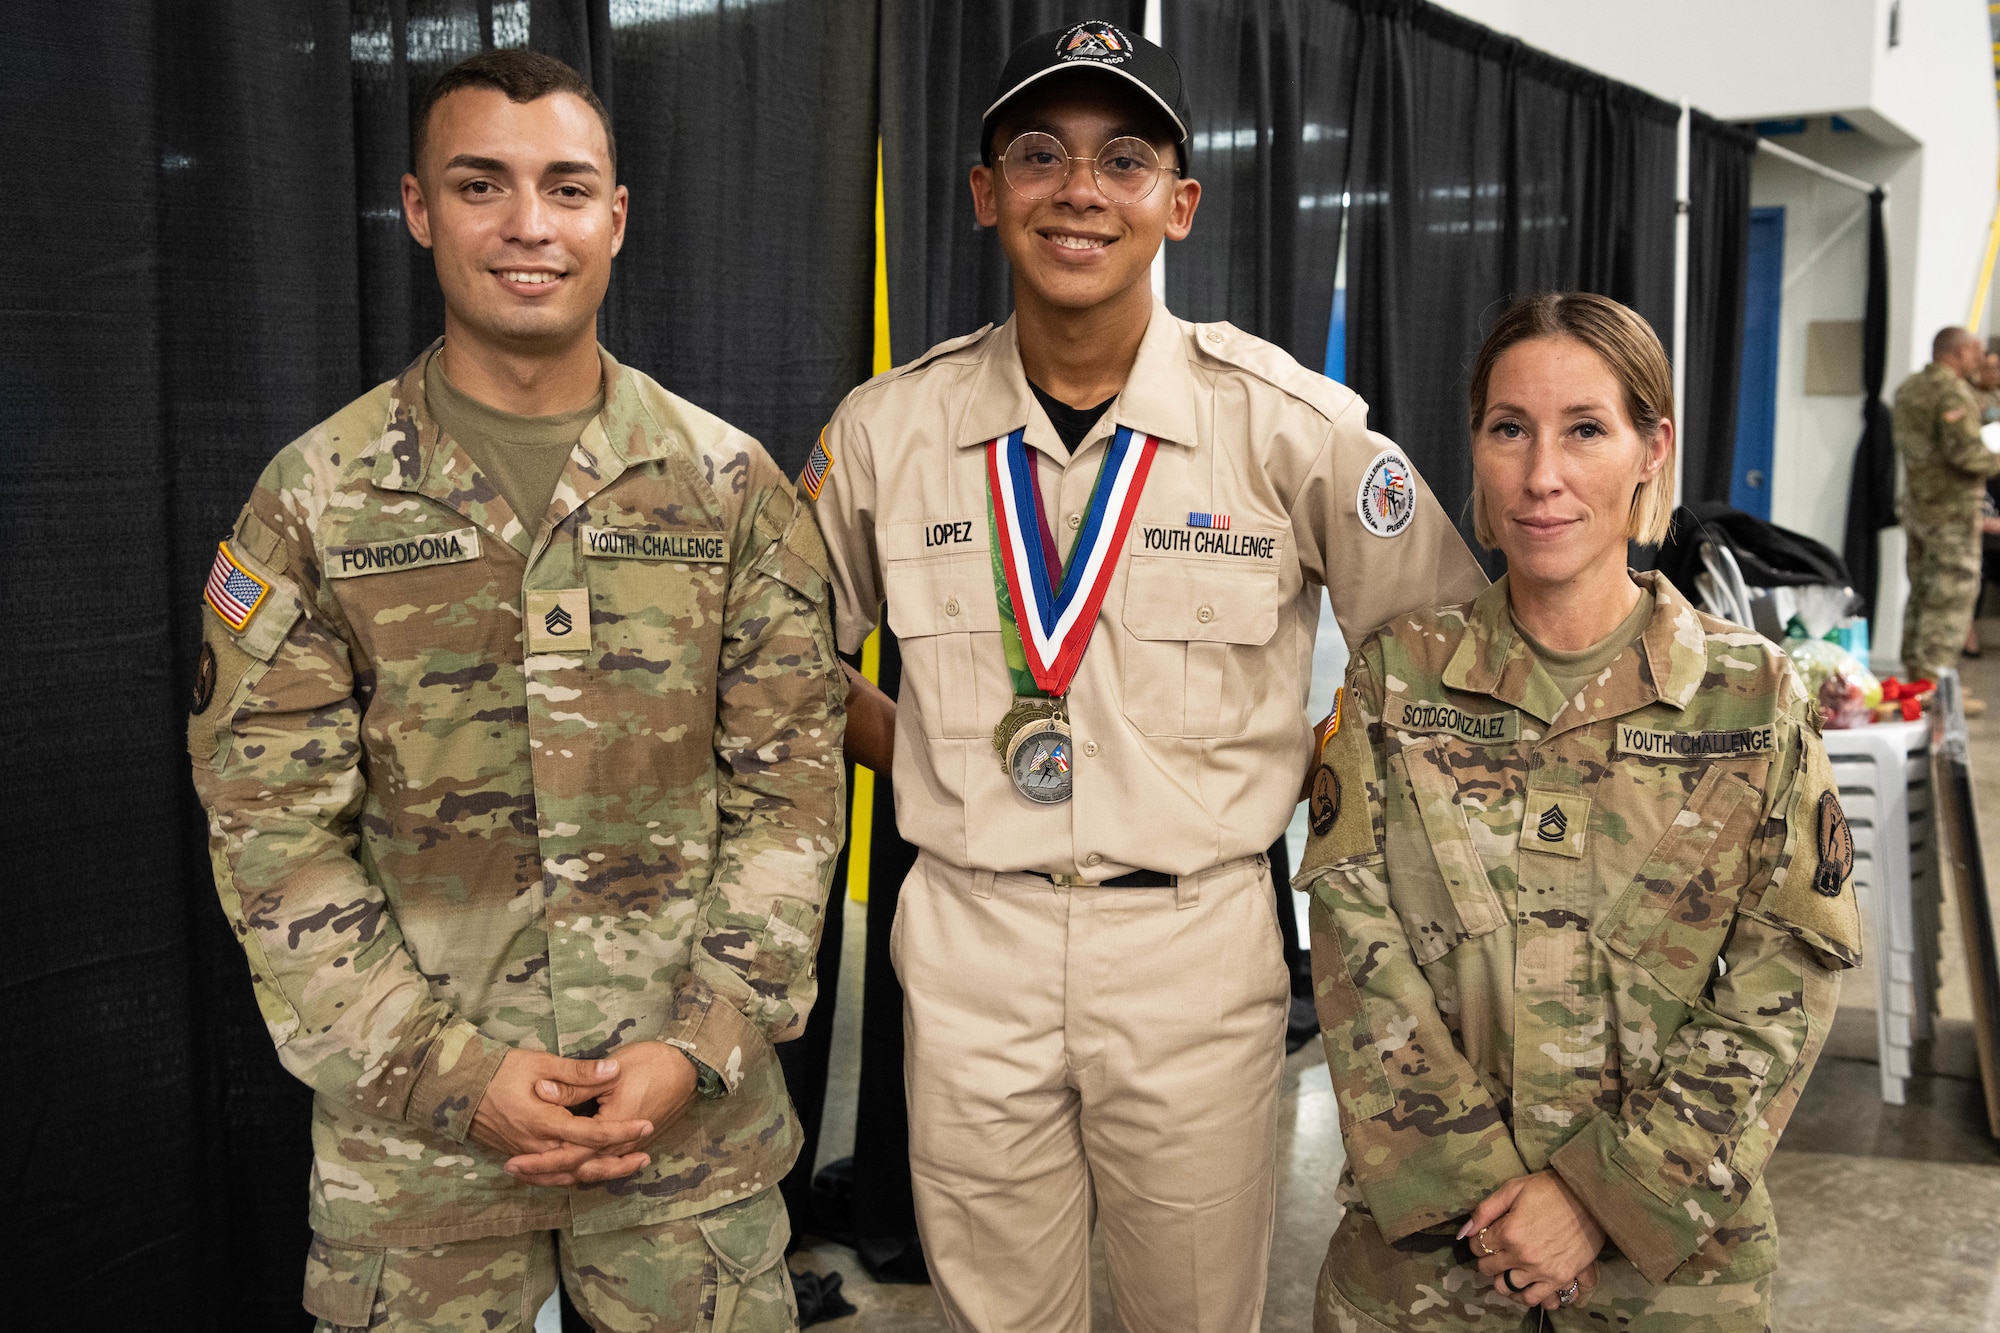 From left, U.S. Army Staff Sgt. Axel I. Fonrodona, a cadre with the Puerto Rico National Guard Youth ChalleNGe Academy, Cadet Jan Lopez with the PRNG Youth ChalleNGe Academy, 3rd Platoon, Wolfpack, Class 23-02, and U.S. Army Sgt. 1st Class Almaleynisse Soto, the cadre supervisor, 3rd Platoon, Wolfpack, Class 23-02, with the PRNG Youth ChalleNGe Academy pose for a photo after the graduation ceremony at Pontifical Catholic University of Puerto Rico, Ponce, Puerto Rico, Sept. 15, 2023. Lopez received his high school diploma after completing the 22-week PRNG Youth ChalleNGe Academy program, where he studied for his high school diploma and also received vocational education from several career fields. (U.S. Air National Guard photo by 2nd. Lt. Eliezer Soto)